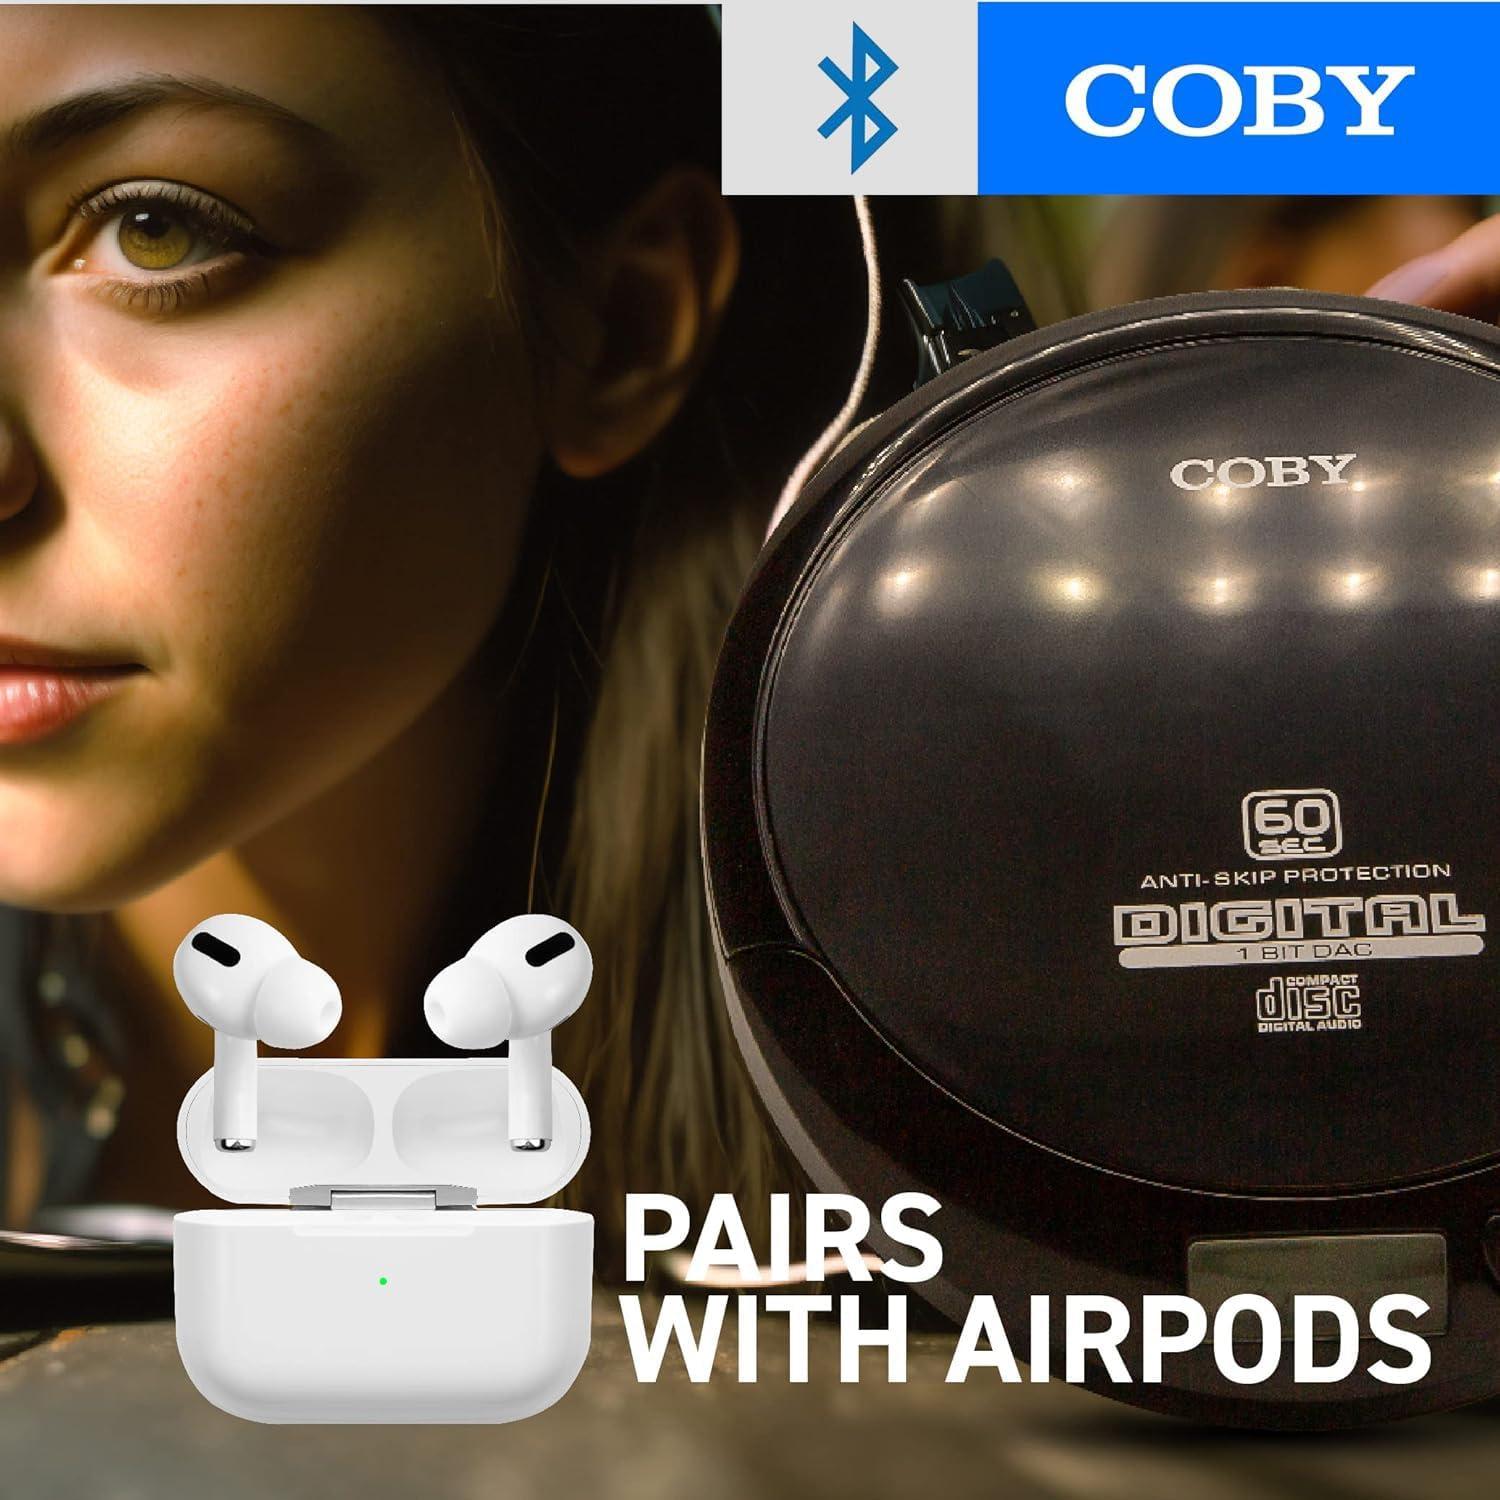 Coby Portable CD Player with Foldable Headphones, 60-Sec Anti-Skip Compact  Disc Player with Headset Bundle for Travel or Home Use